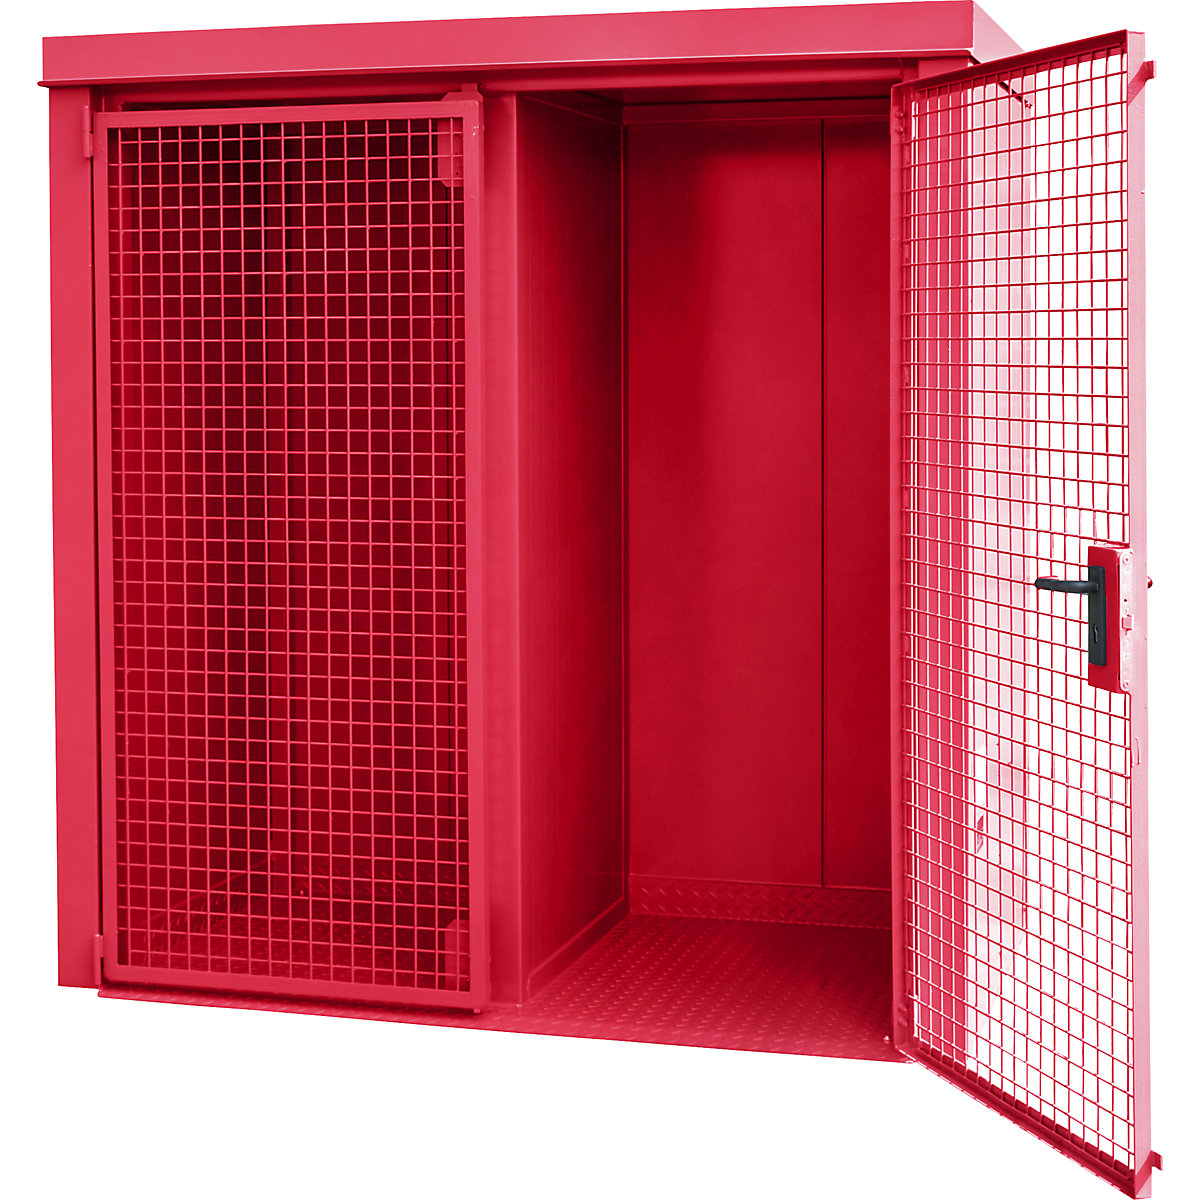 Gas cylinder container with divider, fire resistant – eurokraft pro, for 28 cylinders with Ø 230 mm, red-3